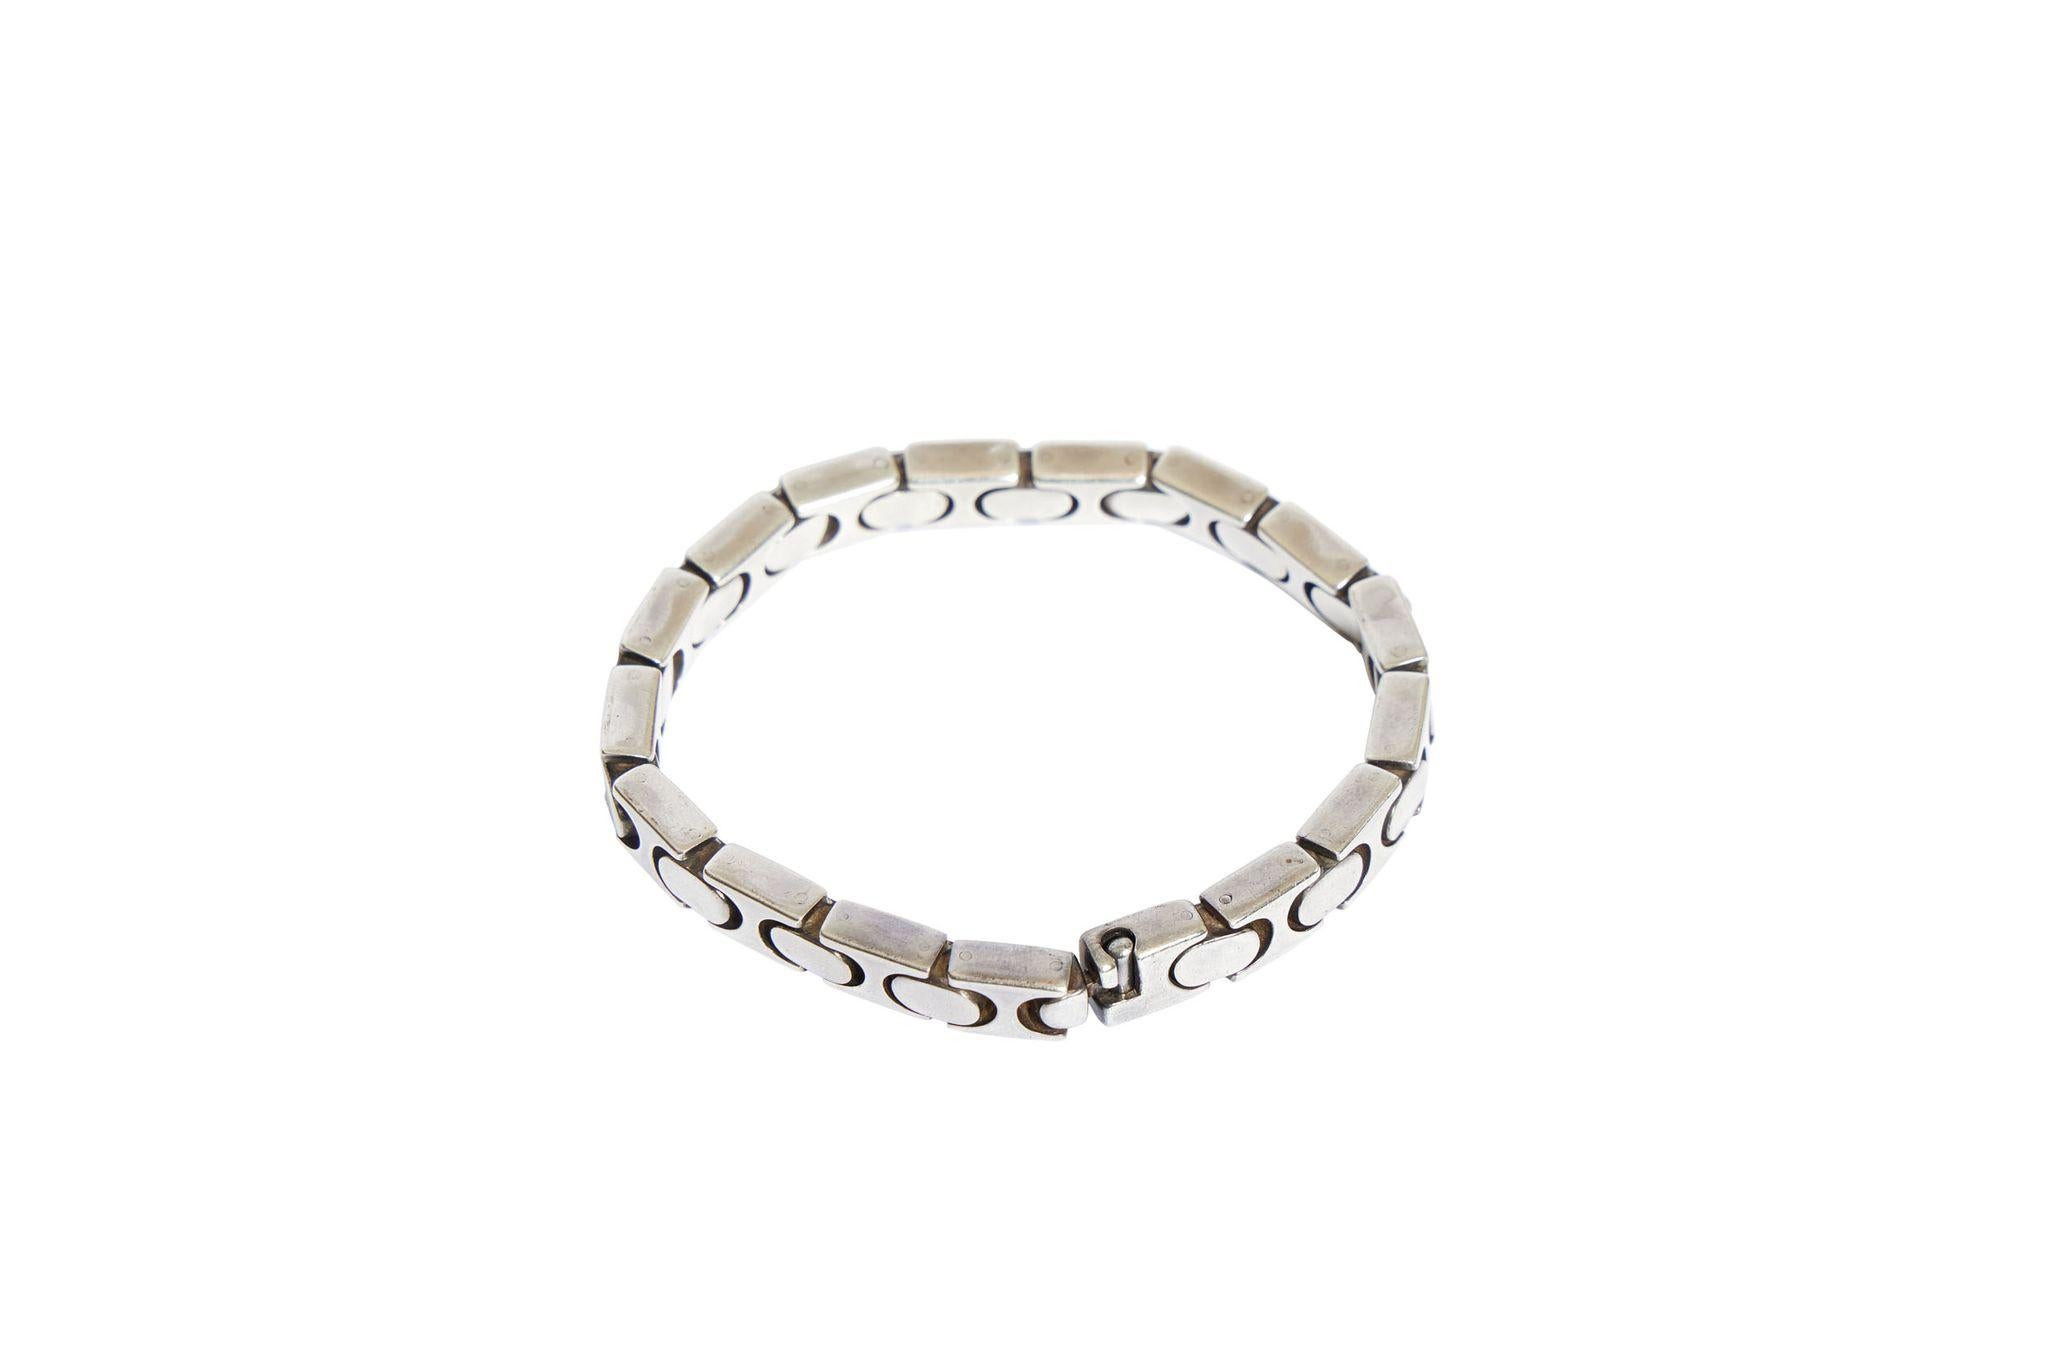 Gucci sterling silver chain link bracelet. Comes with velvet pouch. 